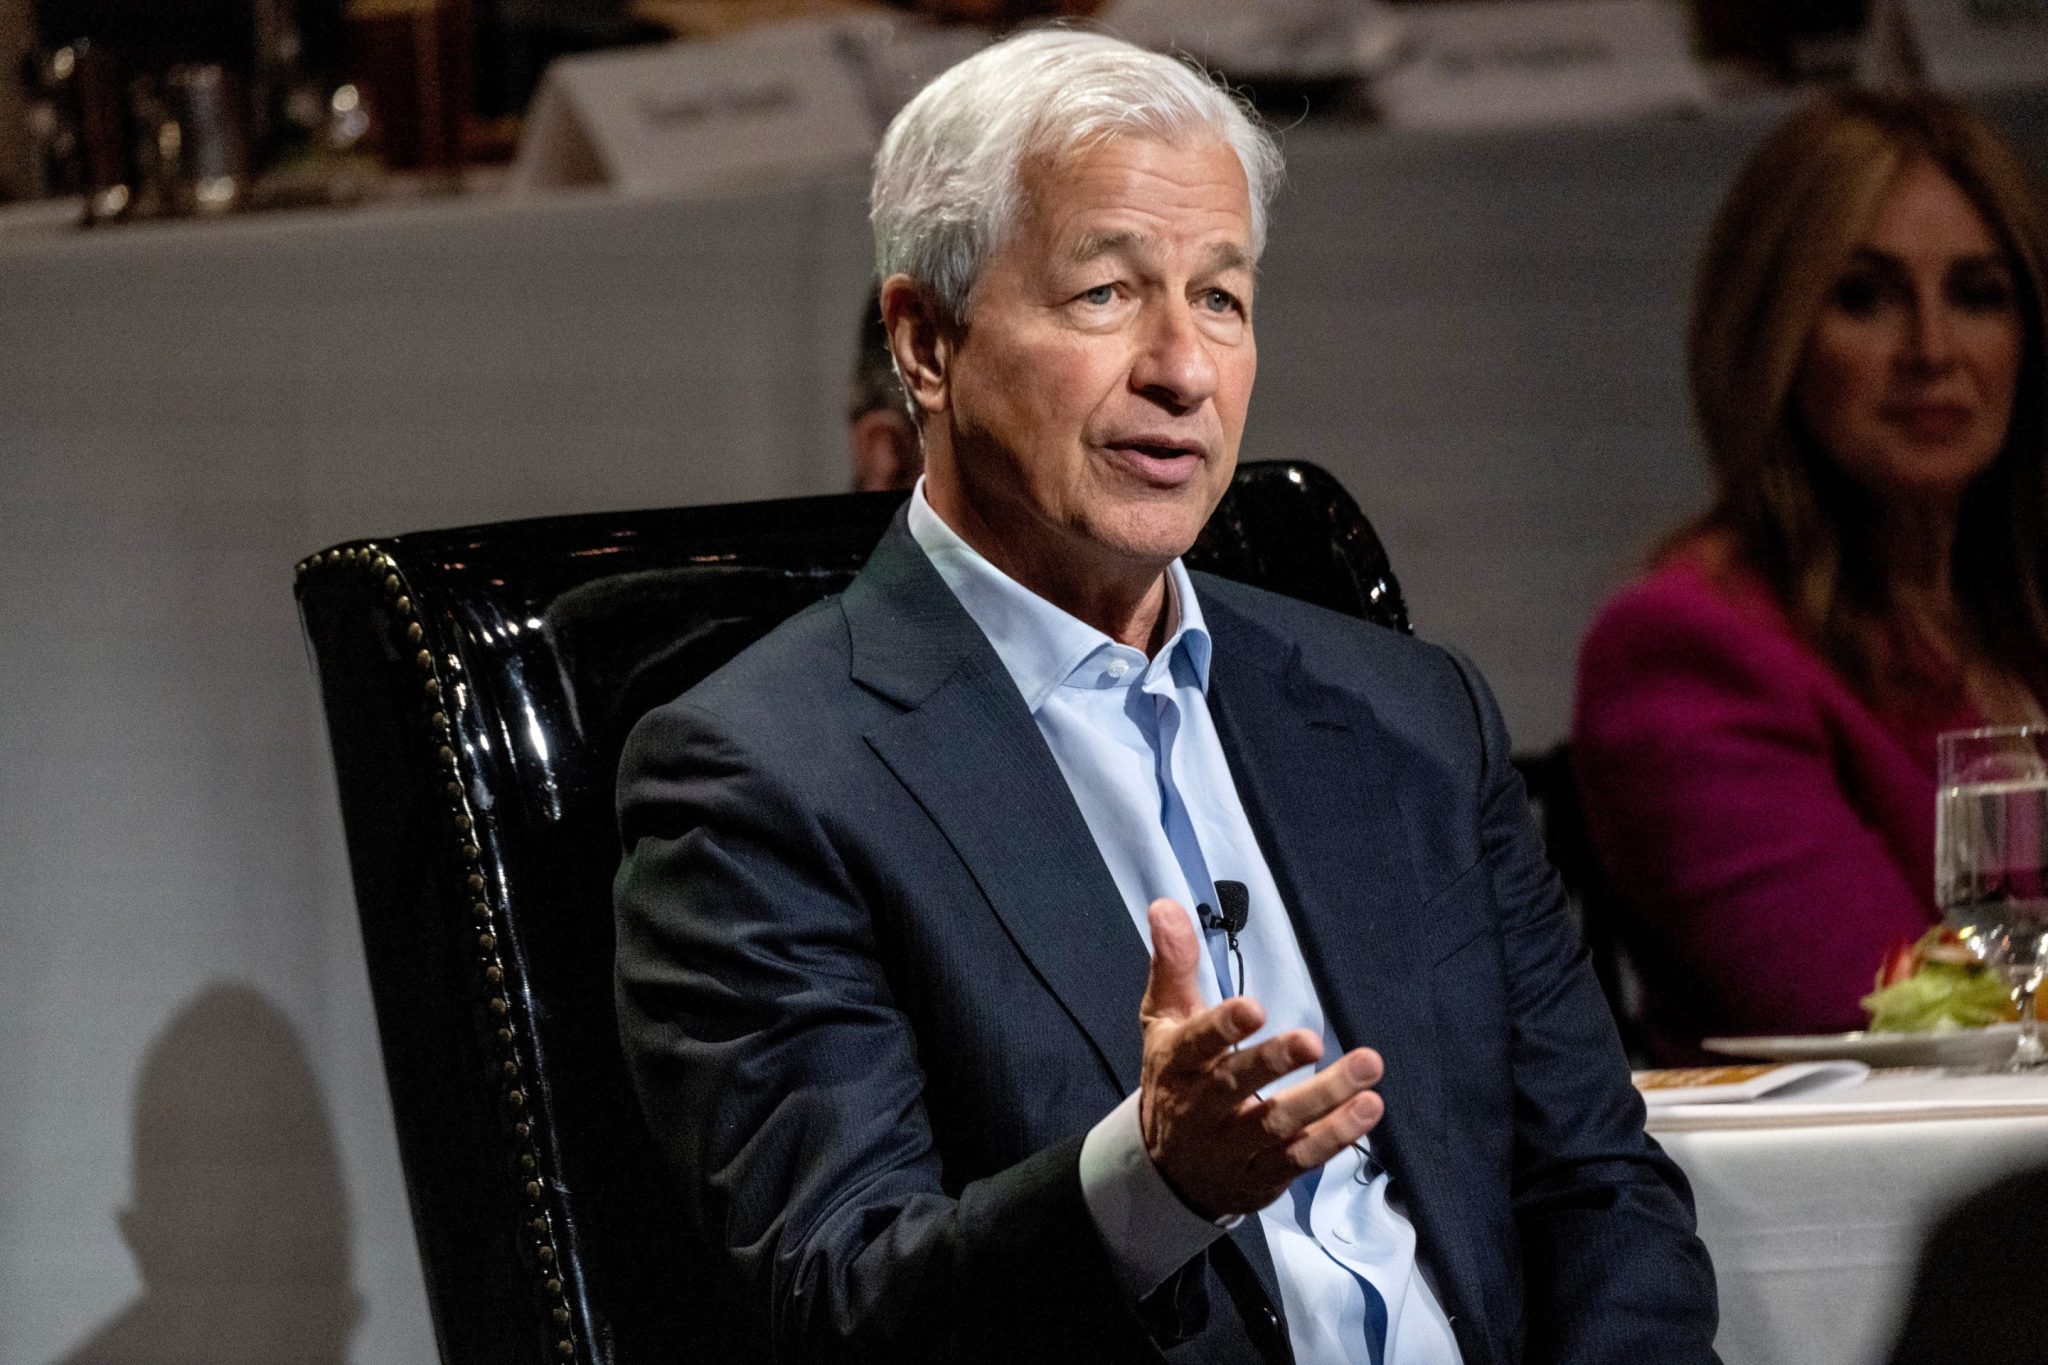 jamie dimon says america needs to ‘take a deep breath’ before facing off with china, because the u.s. is actually in a ‘very good position’ to negotiate